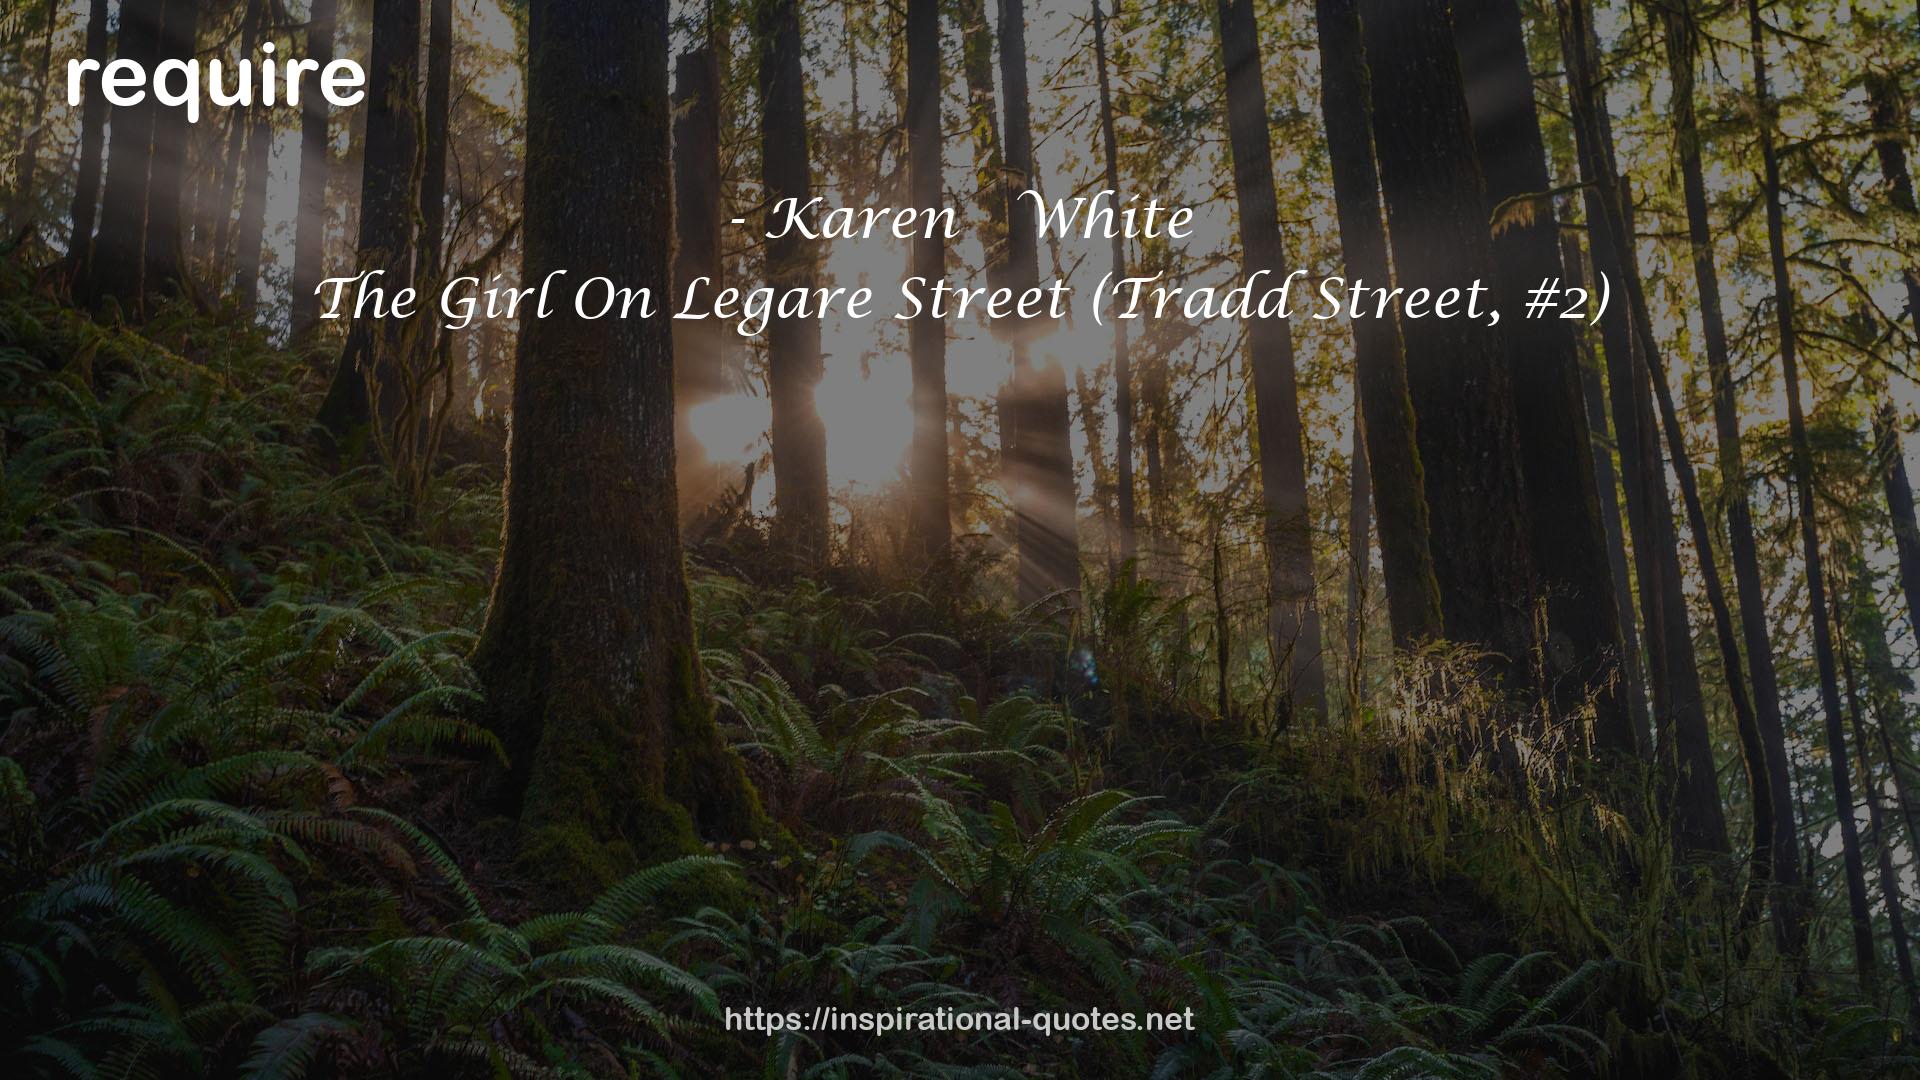 The Girl On Legare Street (Tradd Street, #2) QUOTES